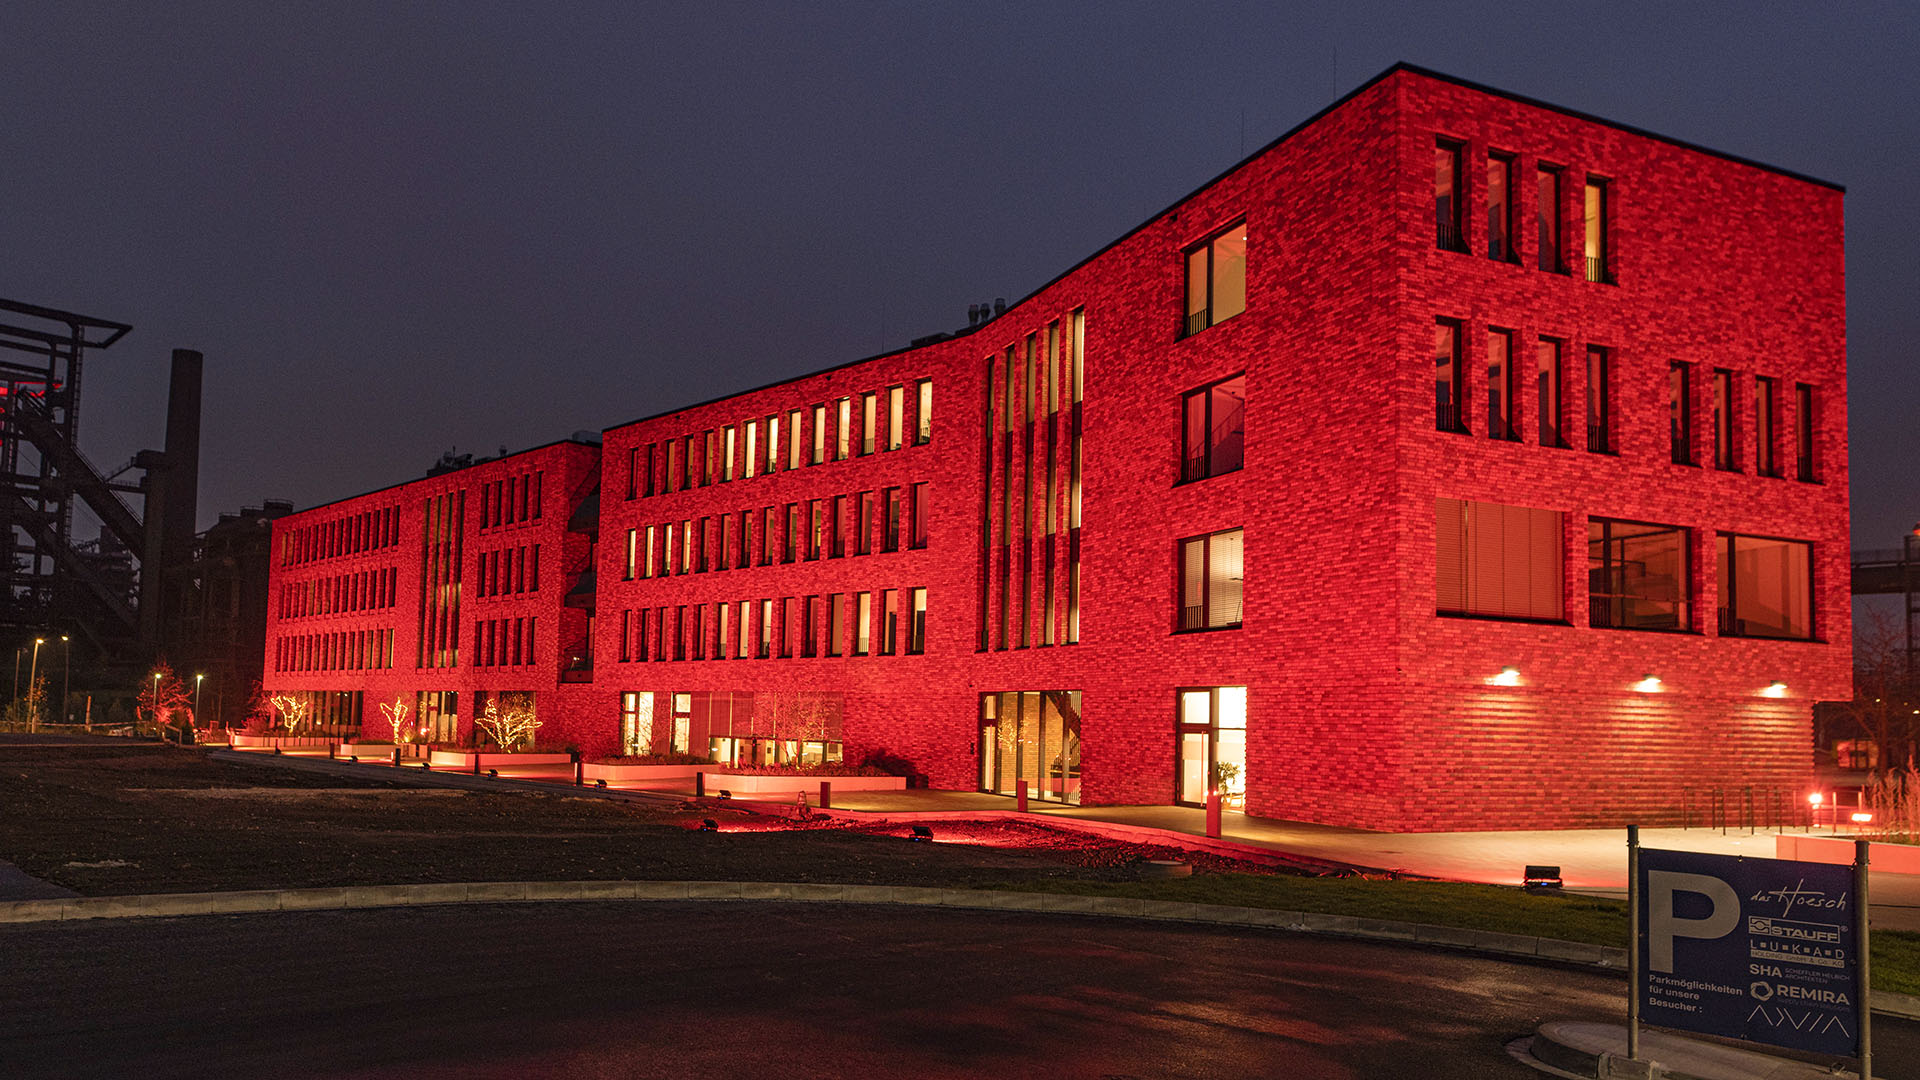 The REMIRA office building in Dortmund was illuminated in orange as part of Orange Your City.